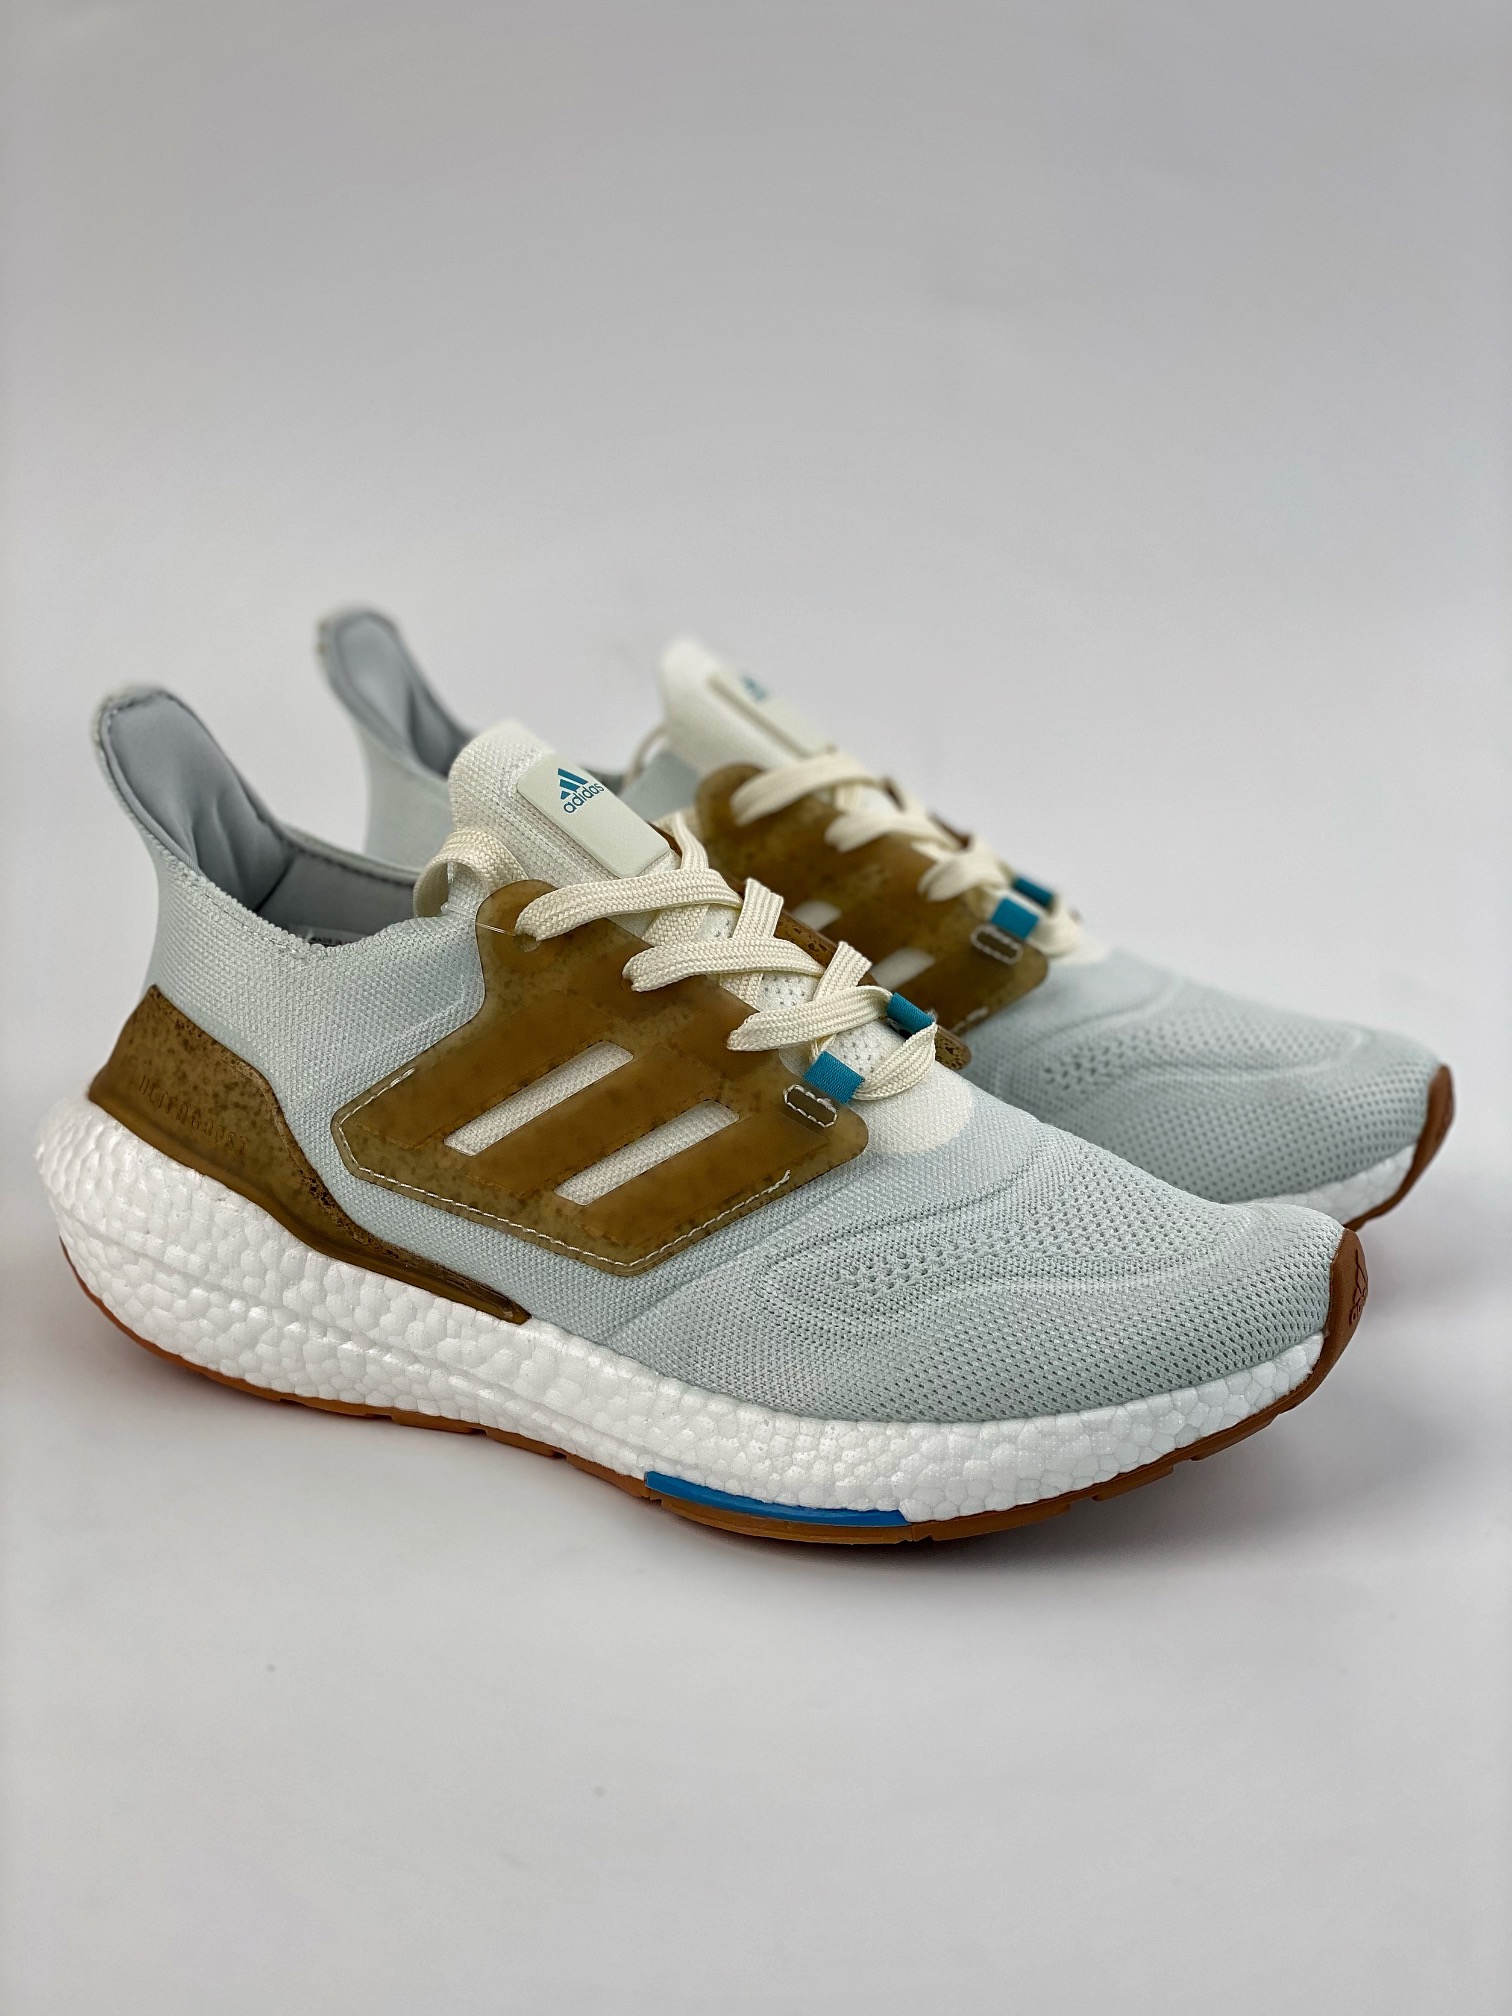 Adidas ULTRA BOOST 22 shock-absorbing sports leisure lightweight breathable running shoes GX9141